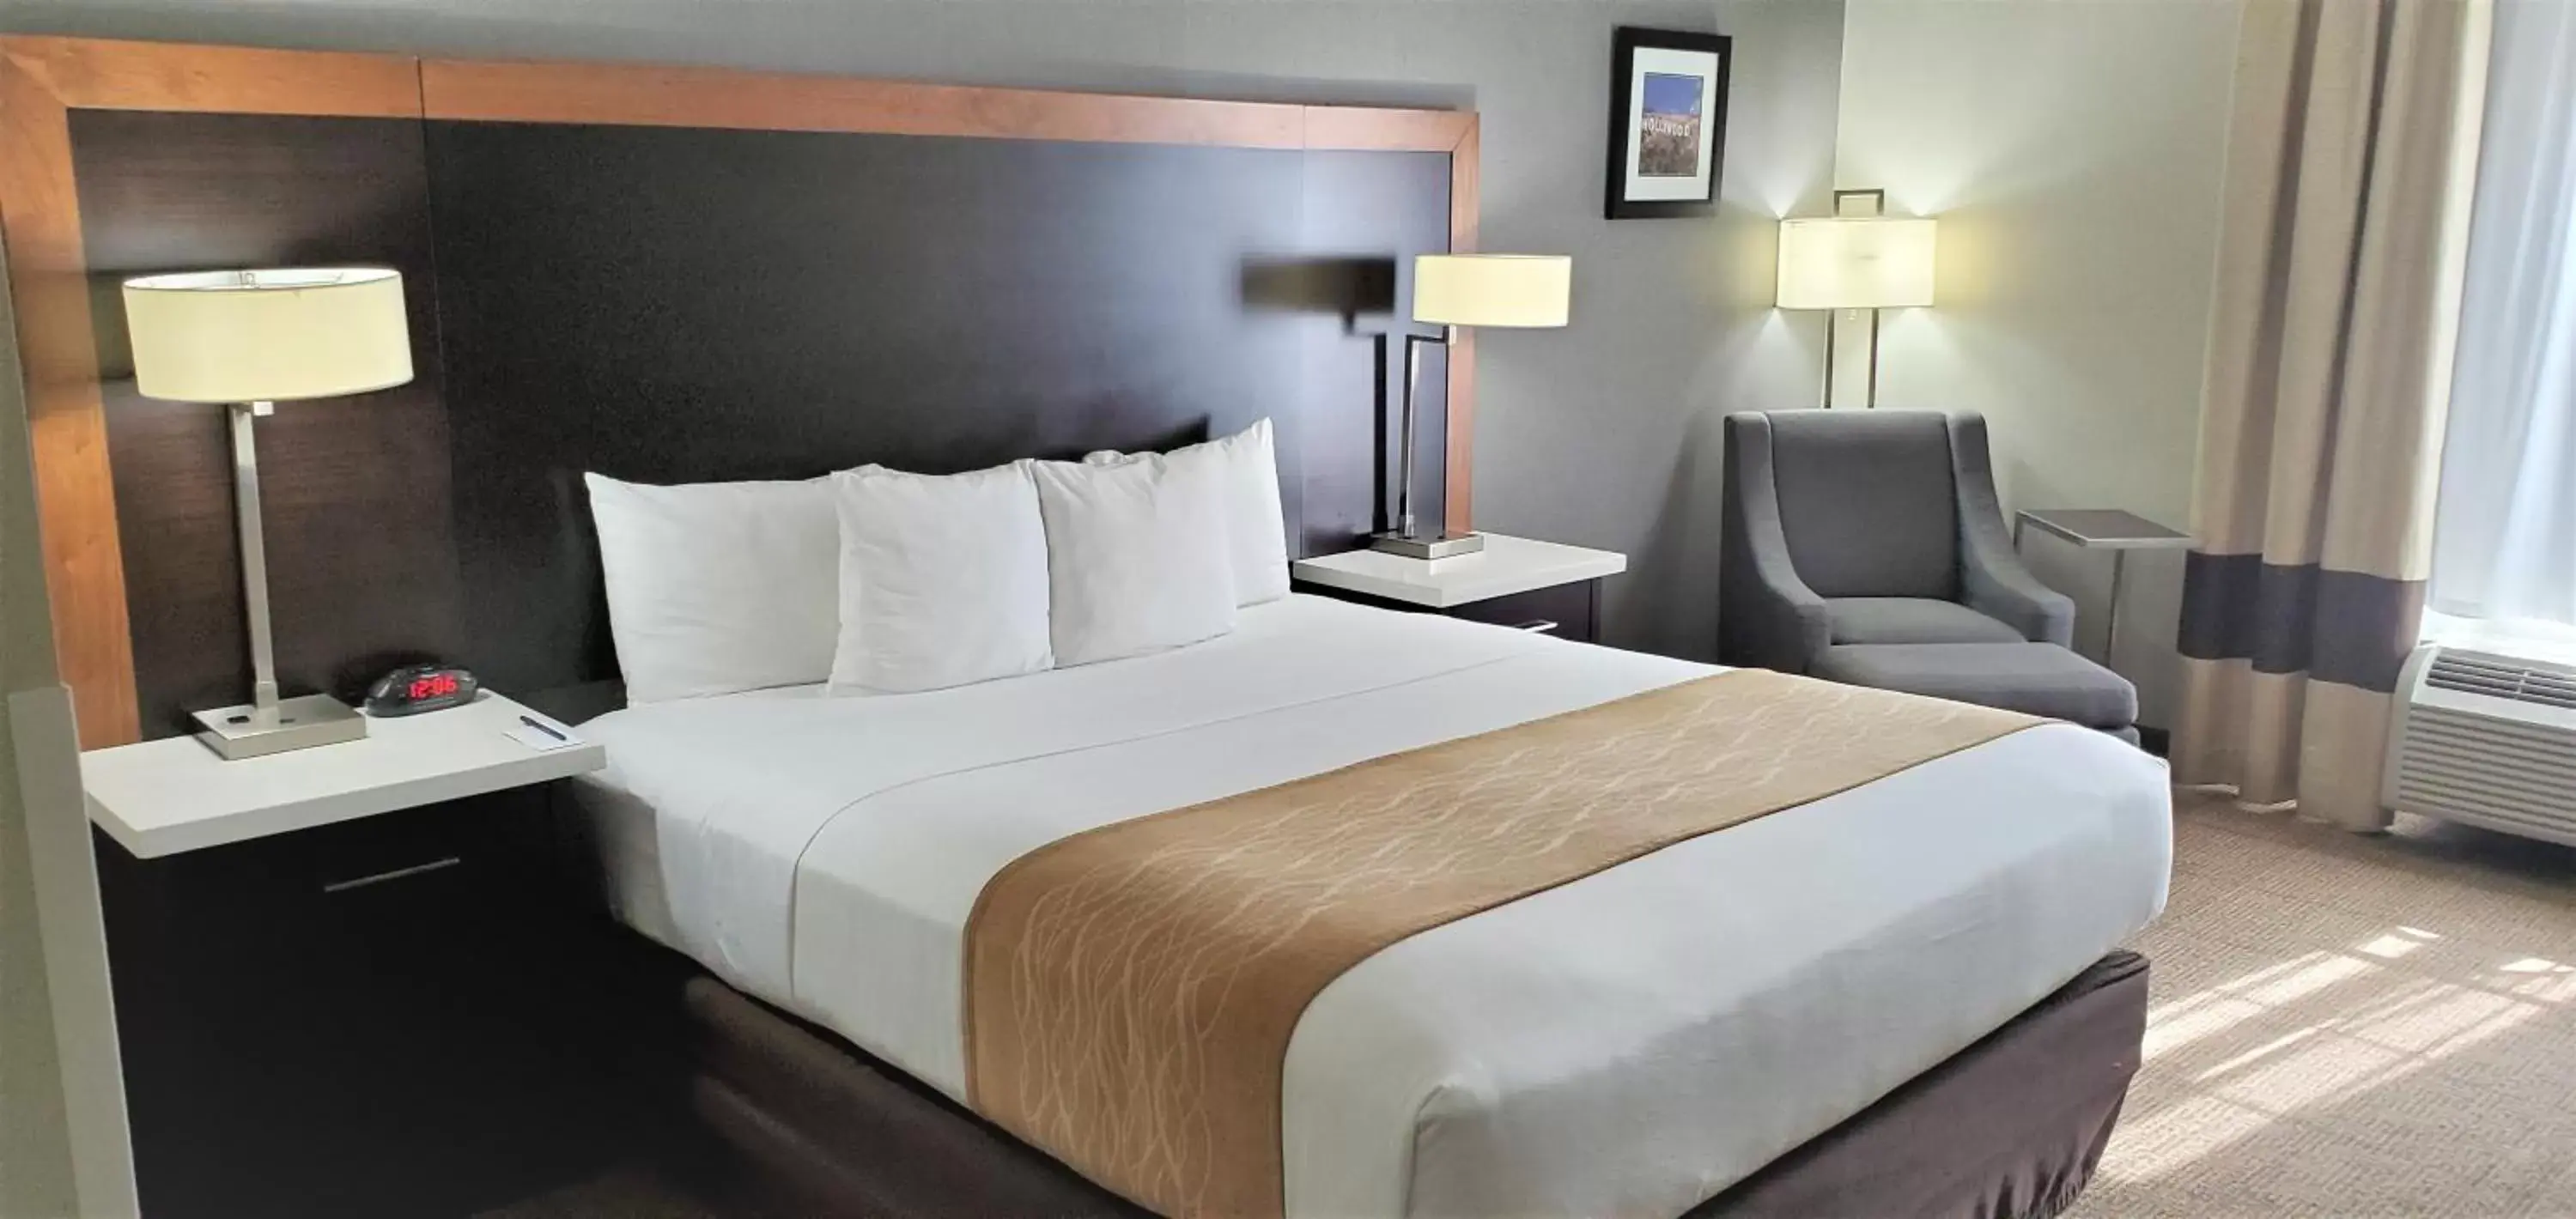 King Room - Non-Smoking in Comfort Inn & Suites Near Universal - North Hollywood – Burbank